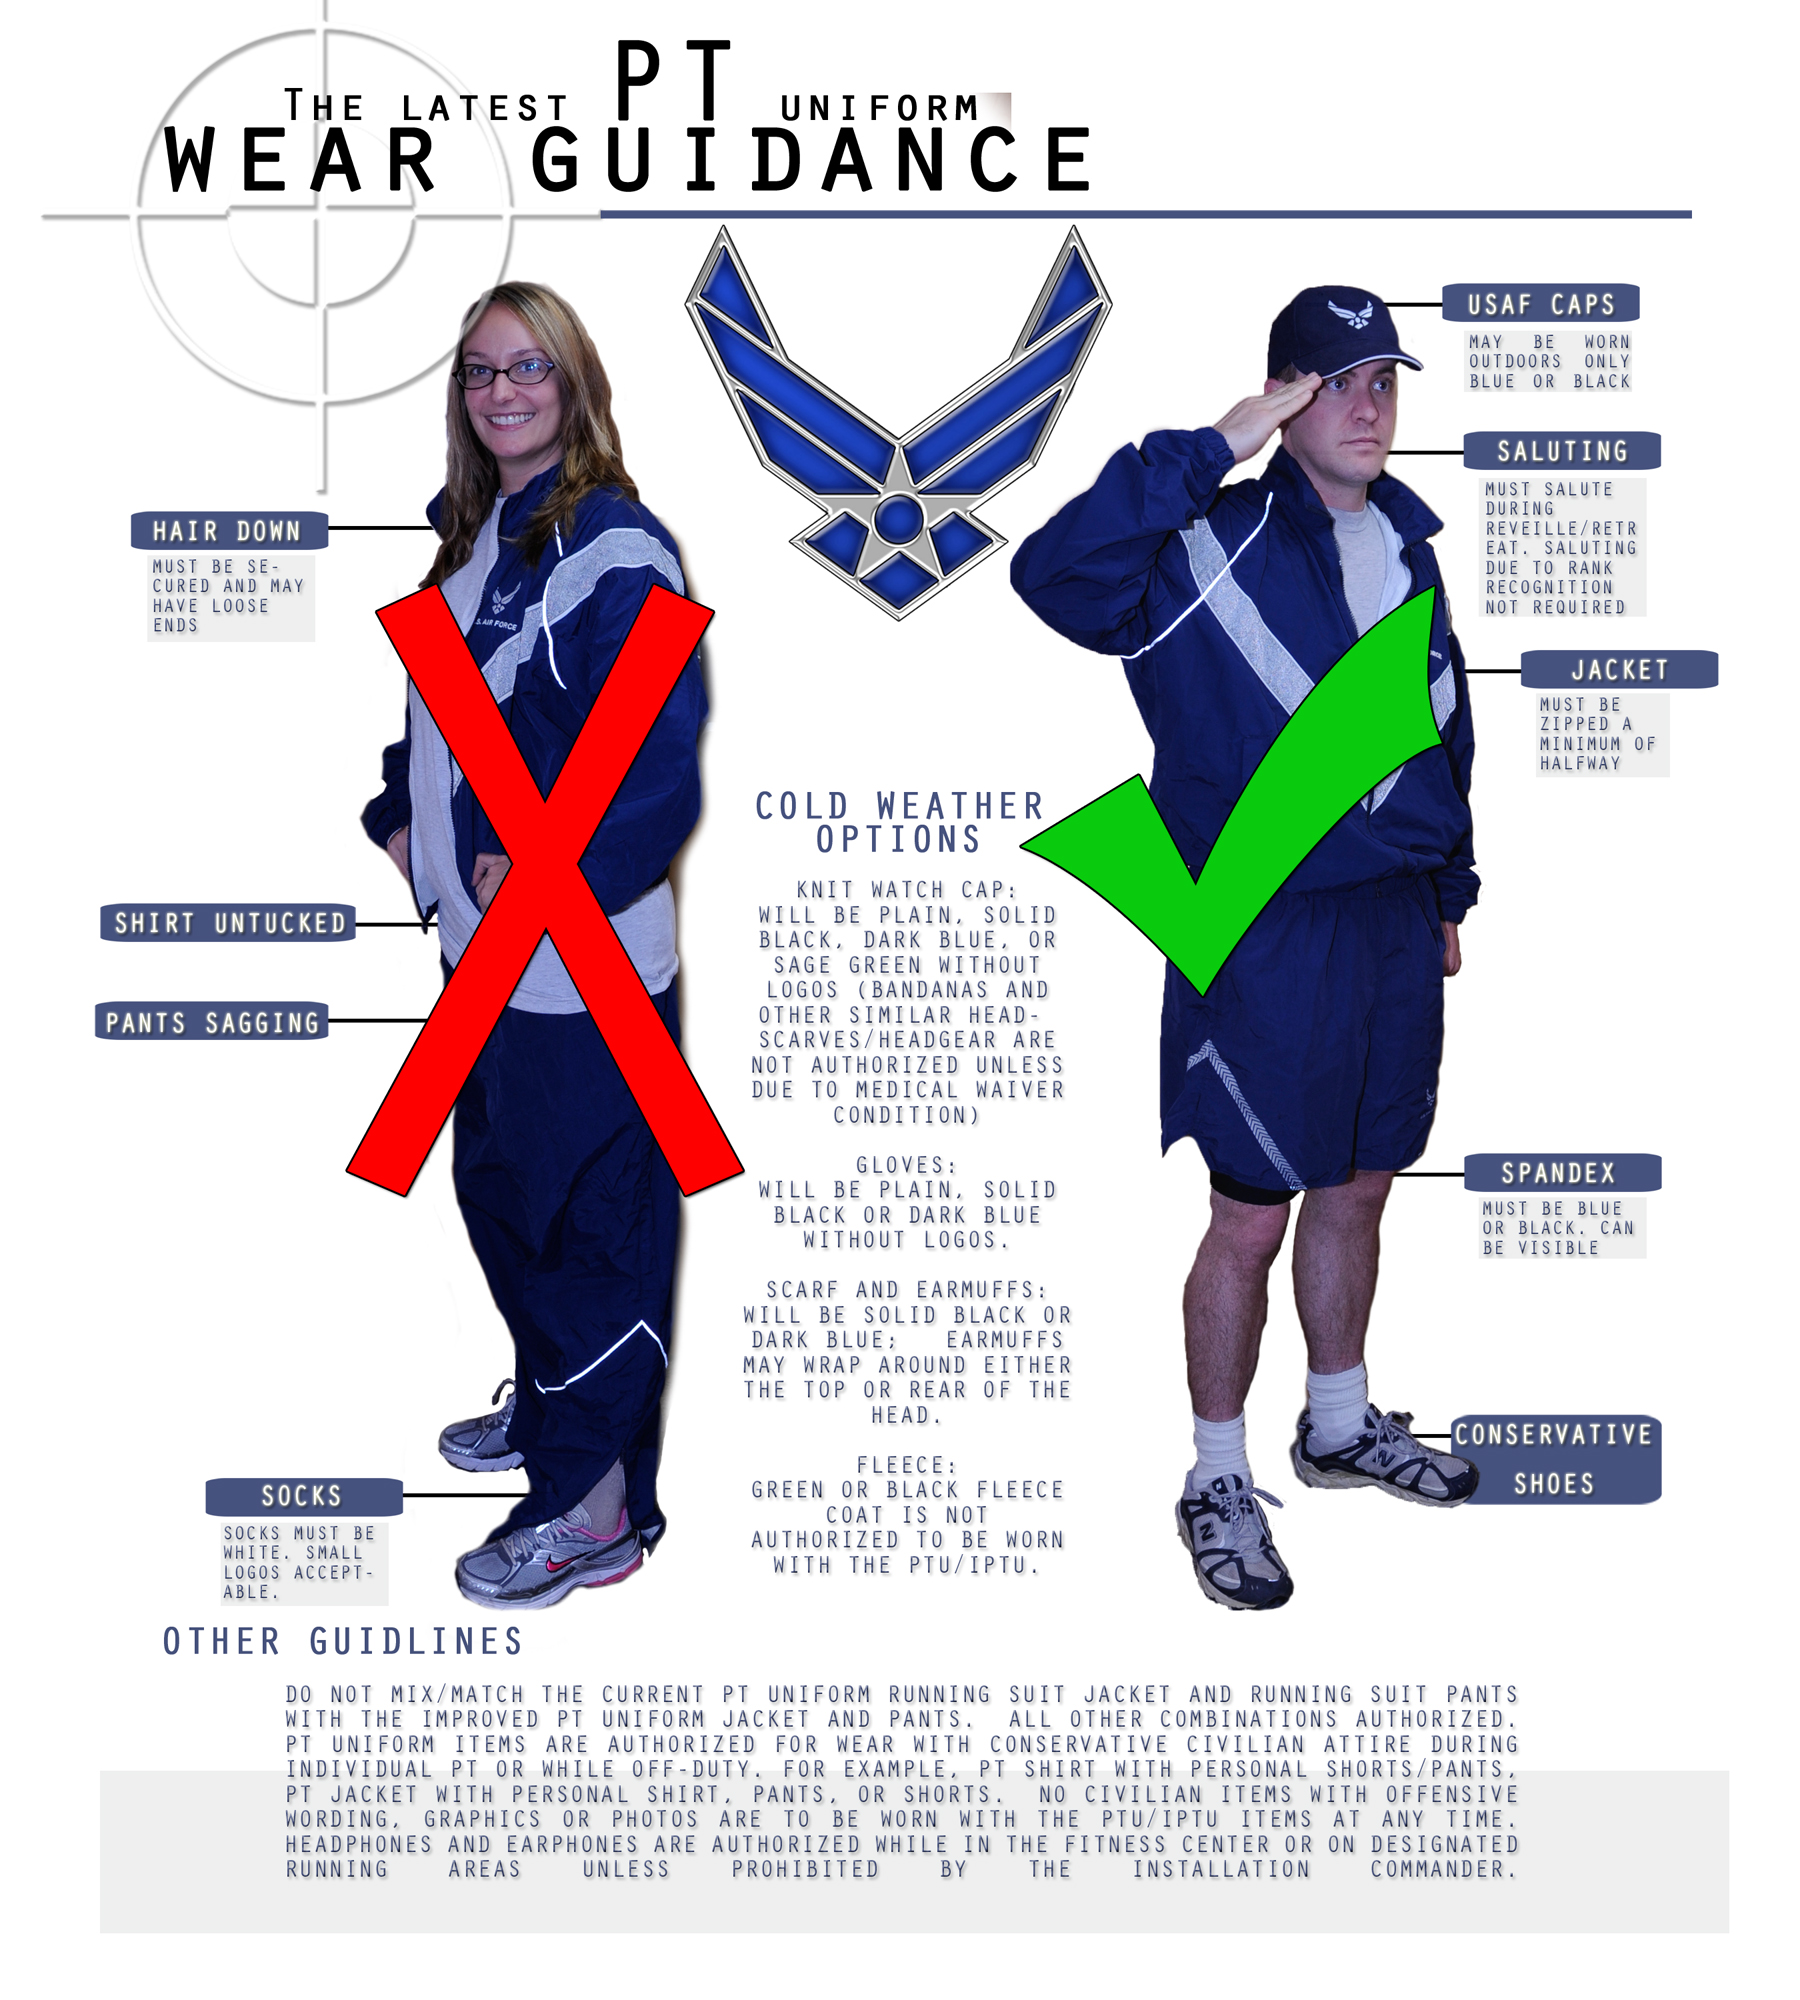 Air Force releases guidance for wear of 